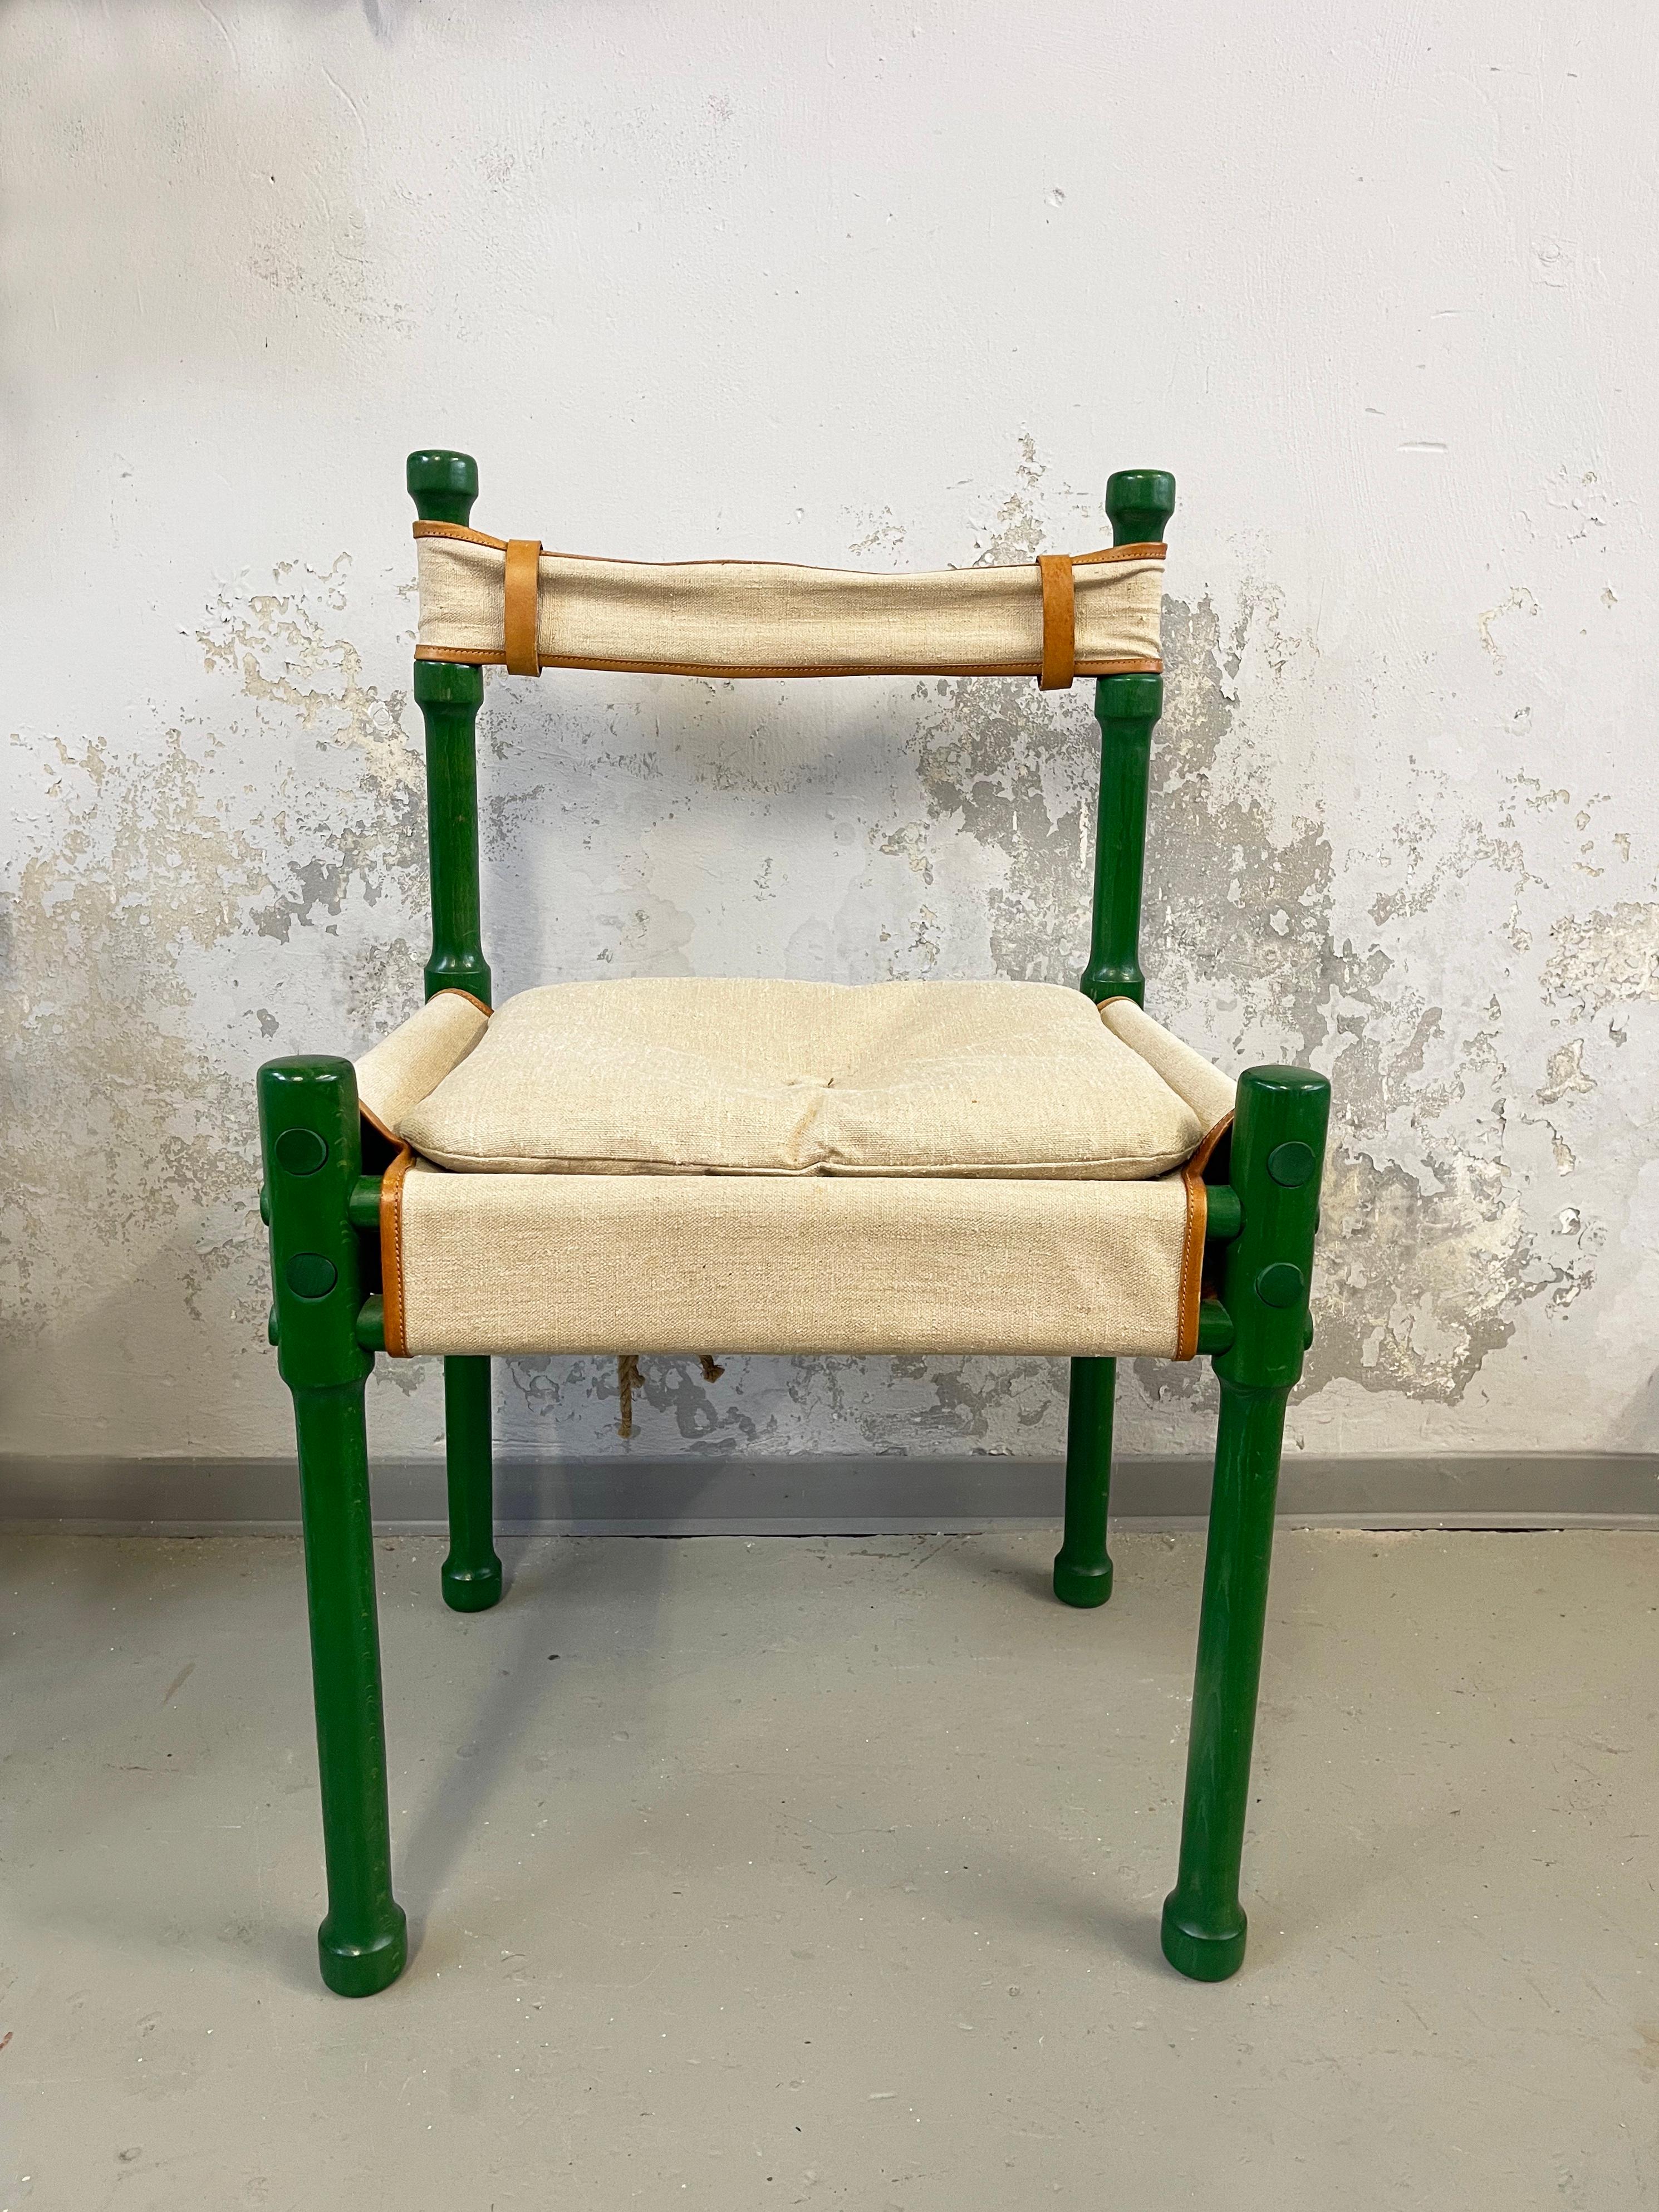 Fantastic original 1970s design, in a robust Scandinavian hunting or Safari chair style.
Quite unusual and beautiful composition of high end materials & craftsmanship indeed.
Juicy green polished wood frame with a beautifully done, round tongue and